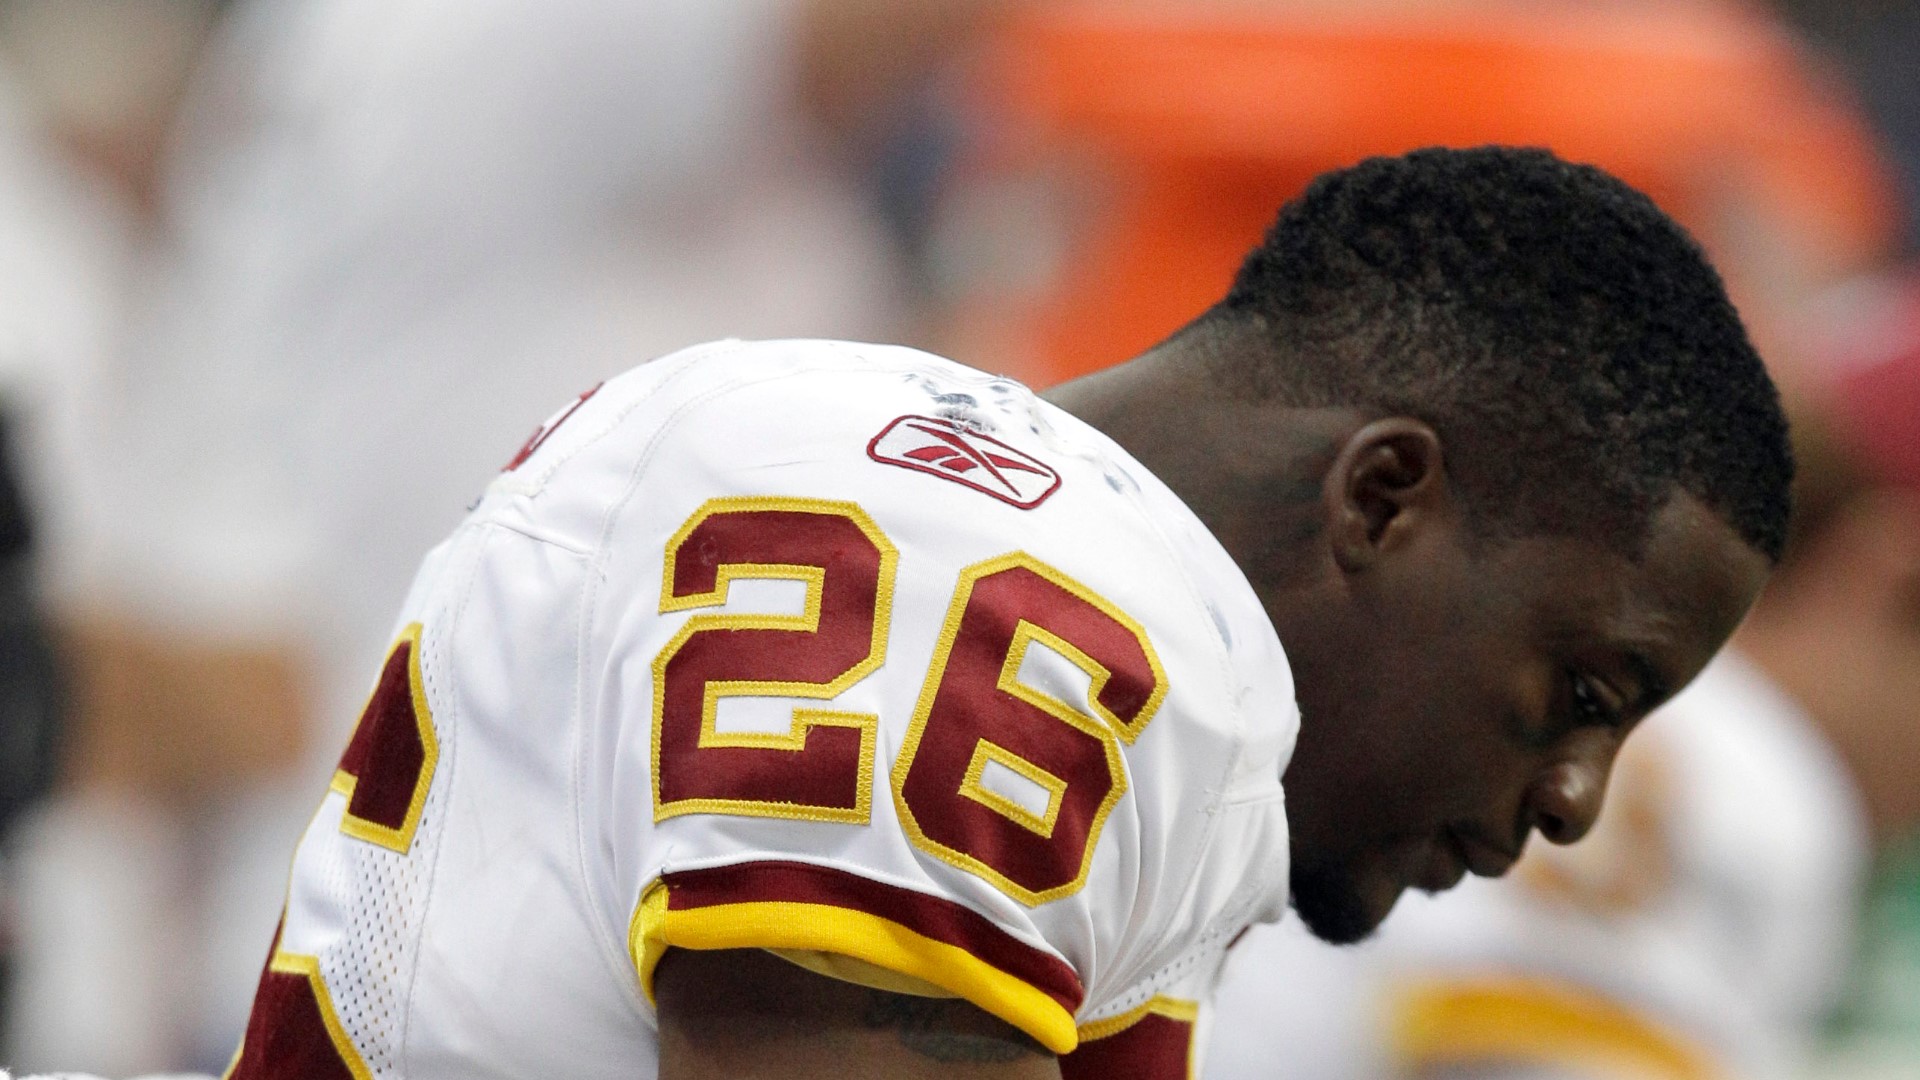 Former Washington Redskins running back Clinton Portis was one of ten former National Football League players that have been charged by the U.S. Justice Department (